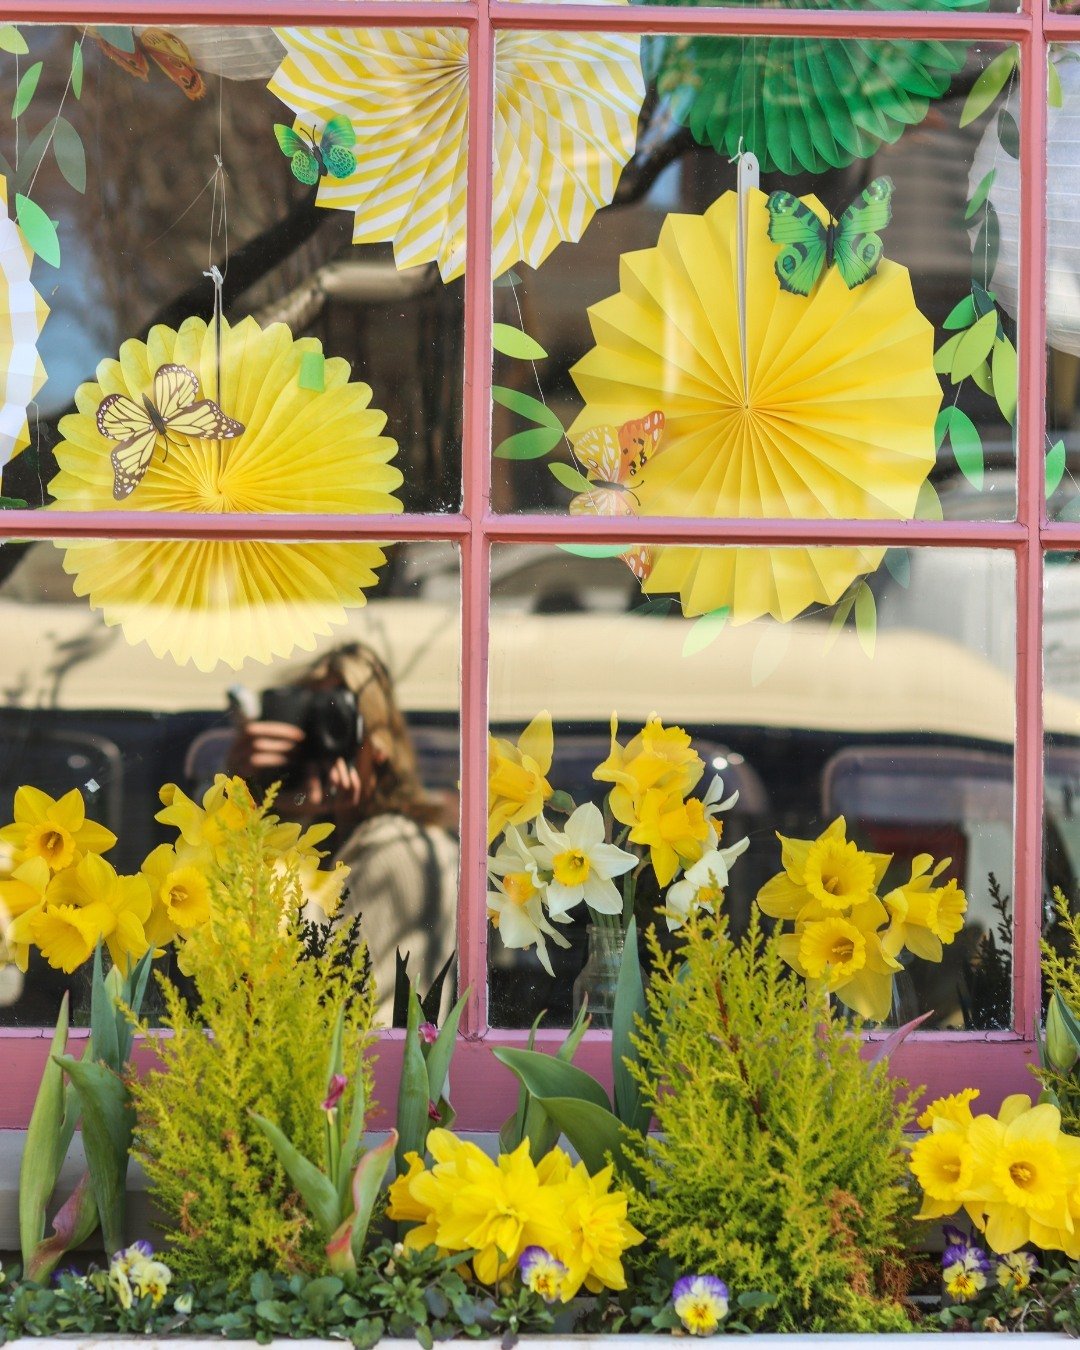 Happy Daffy, Nantucket! 🌼 We can't wait to spend the whole weekend celebrating the start of the busy season. Will we see you there? 👀✨